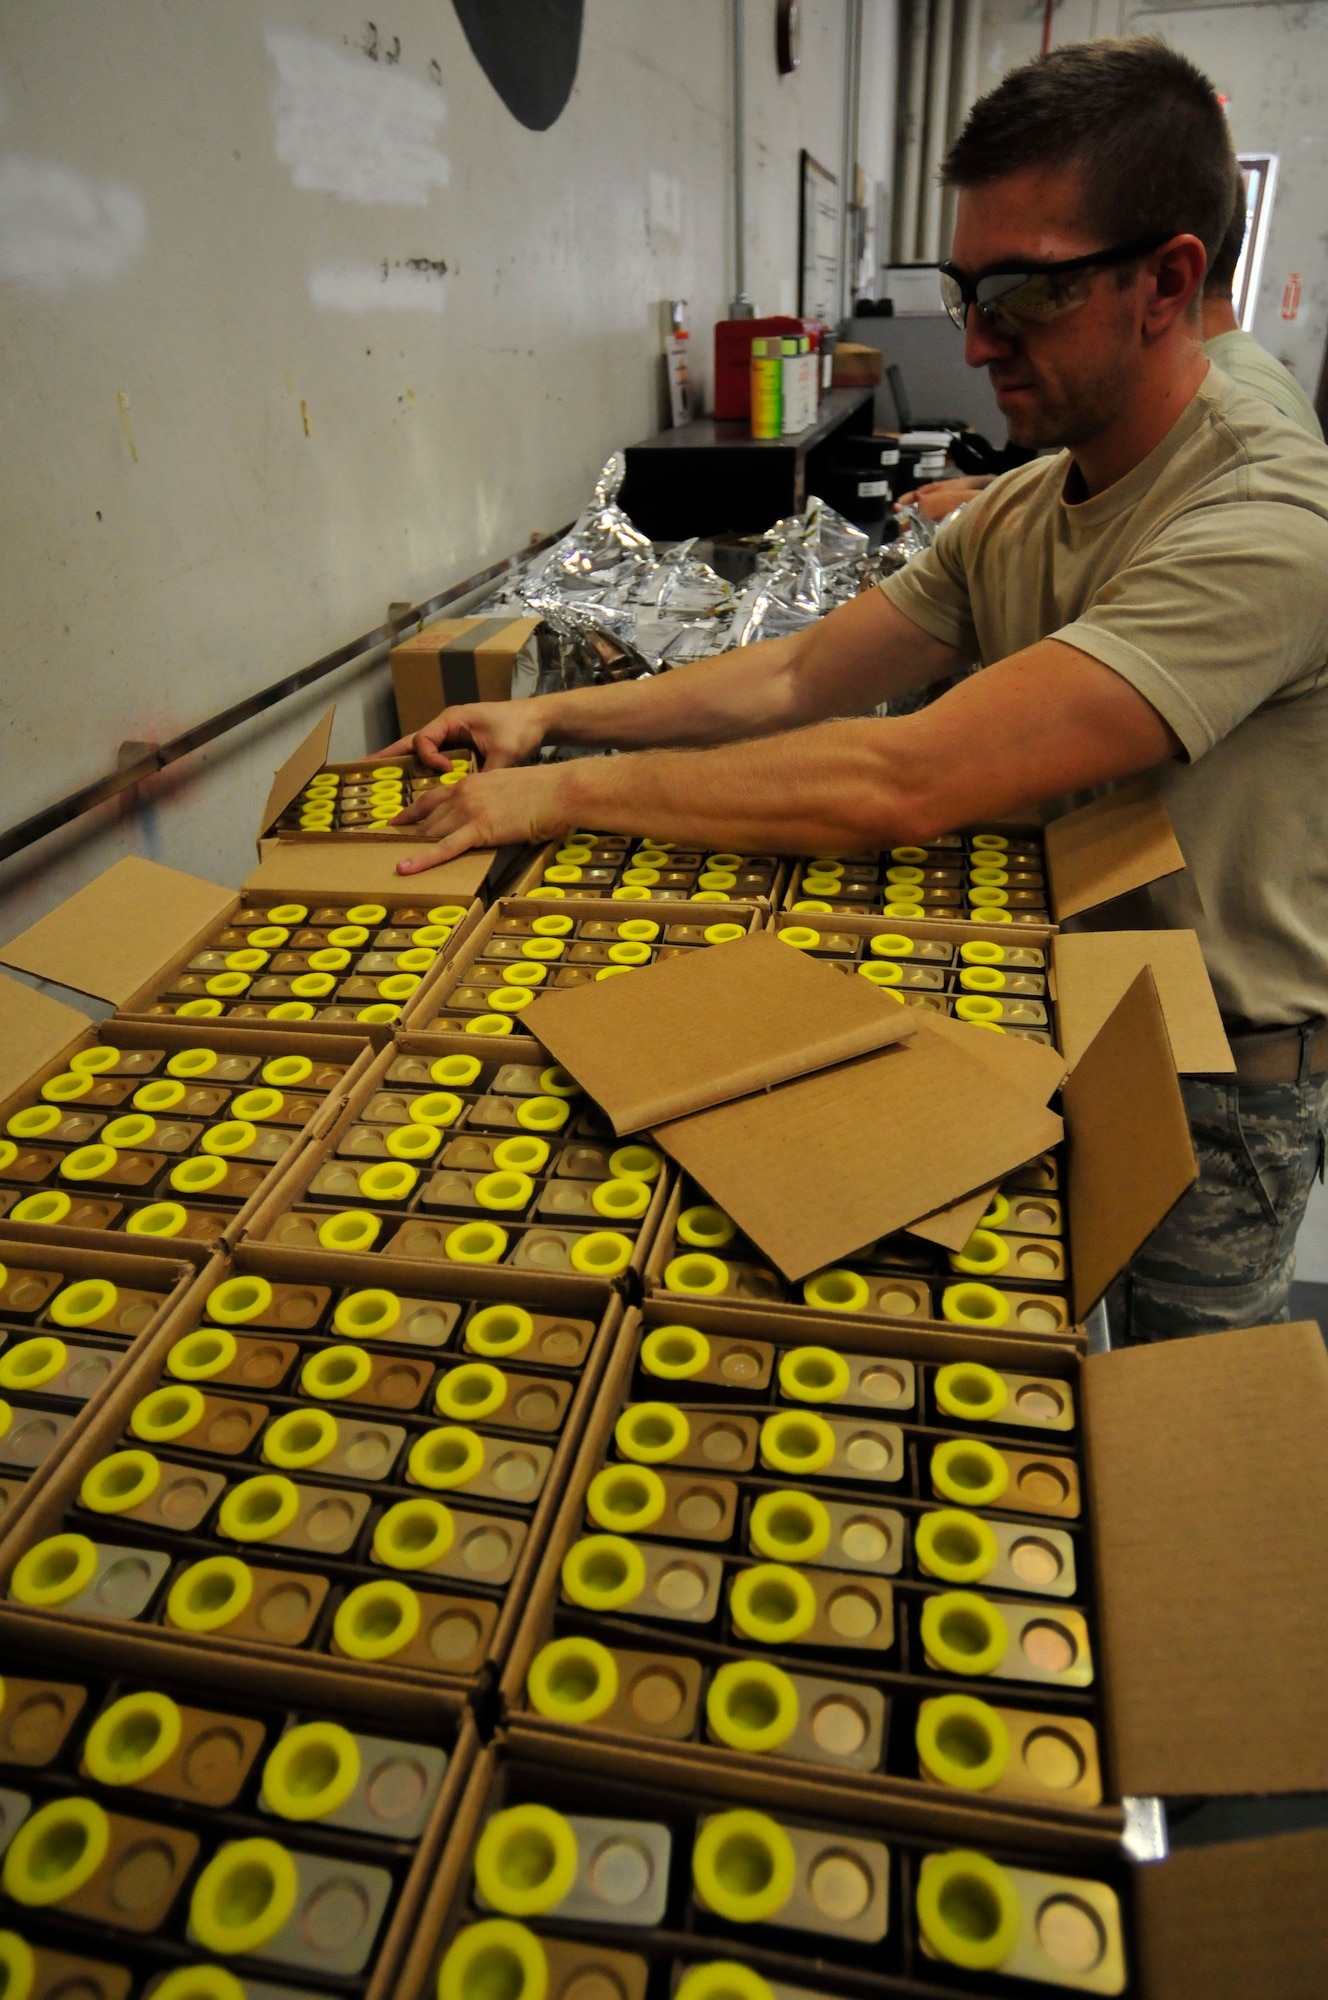 U.S. Air National Guard Senior Airman Chad Woodward, equipment ordinance mechanic for the 125th Fighter Wing, unpacks flares from there transportation crates during a 'flare build' at Jacksonville IAP, Fla. on Sept. 14, 2013. During this particular build, 1080 flares were assembled by several U.S. Air National Guard Airmen in under an hour and made ready for the F-15 fighting mission. U.S. Air National Guard Photo by Staff Sgt. Jeremy Brownfield. Released.